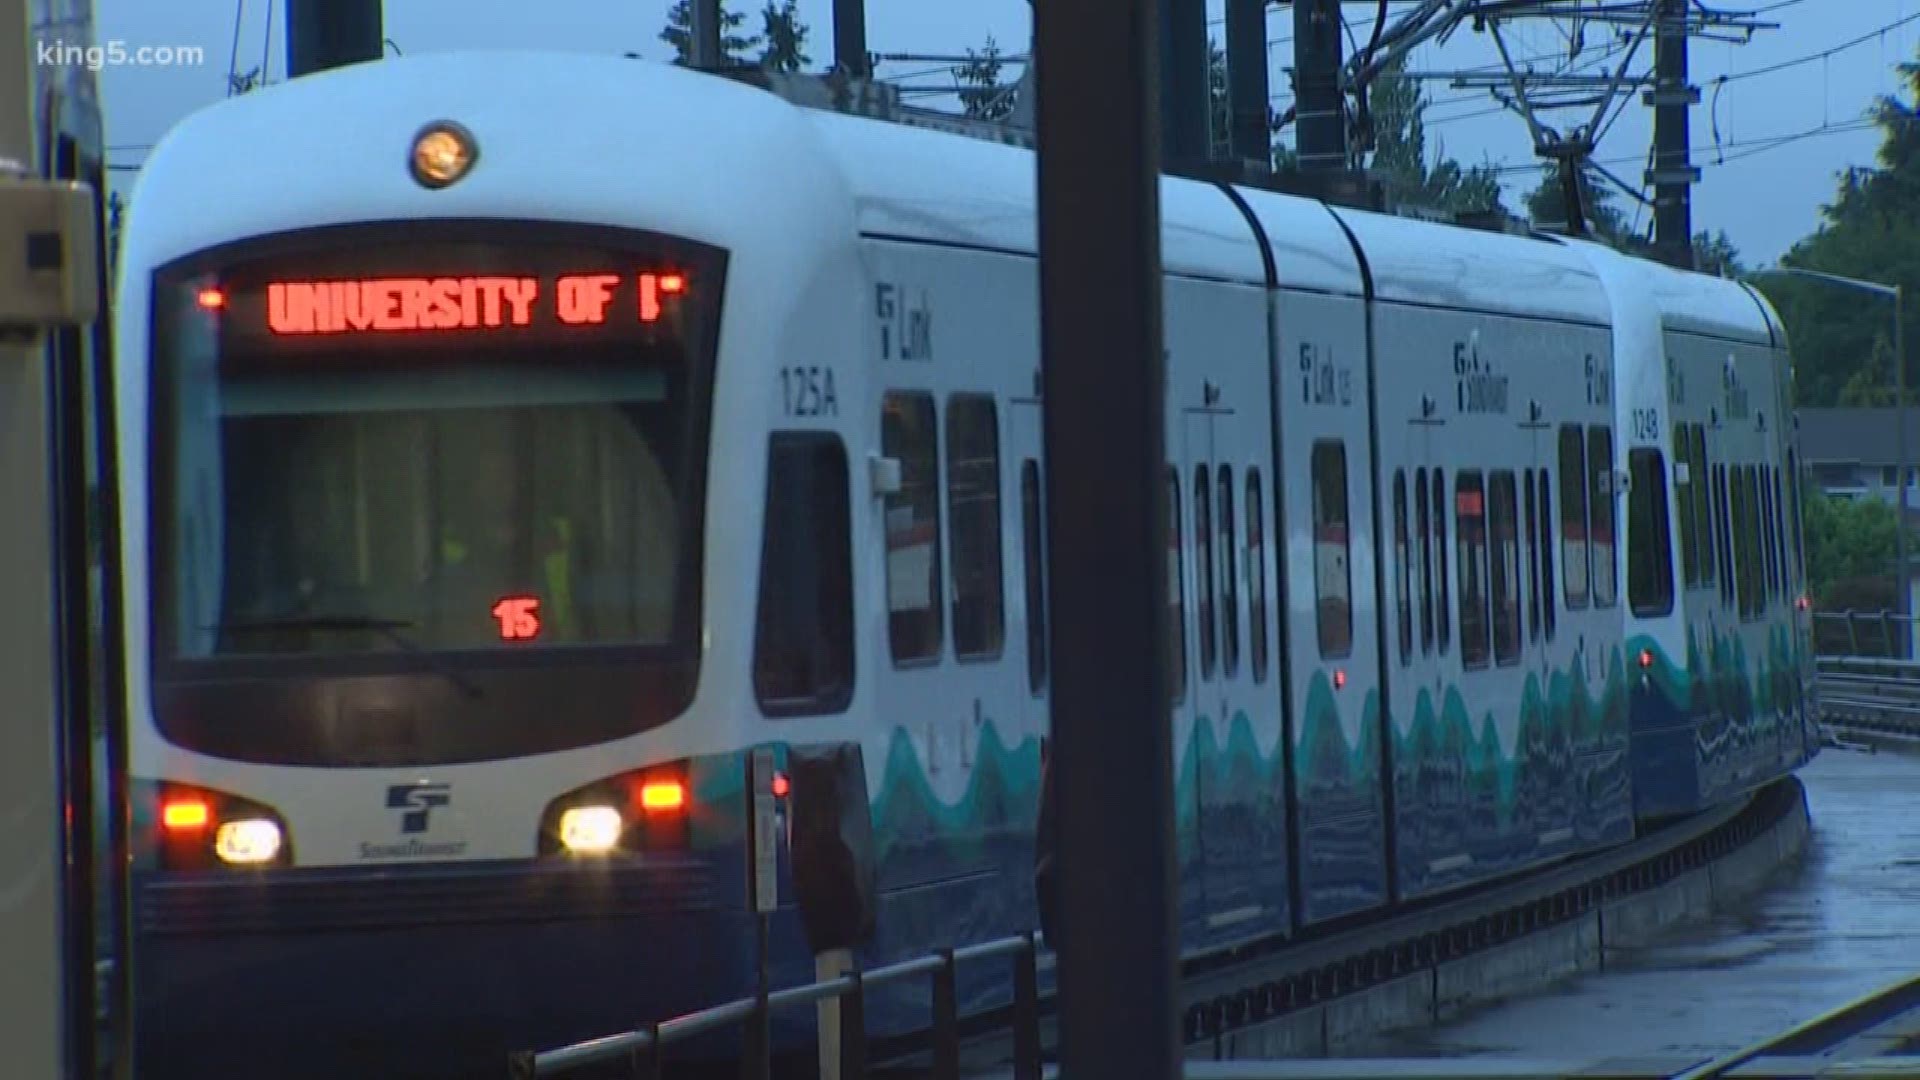 A proposed location for a light rail station in Fife is catching some residents by surprise.